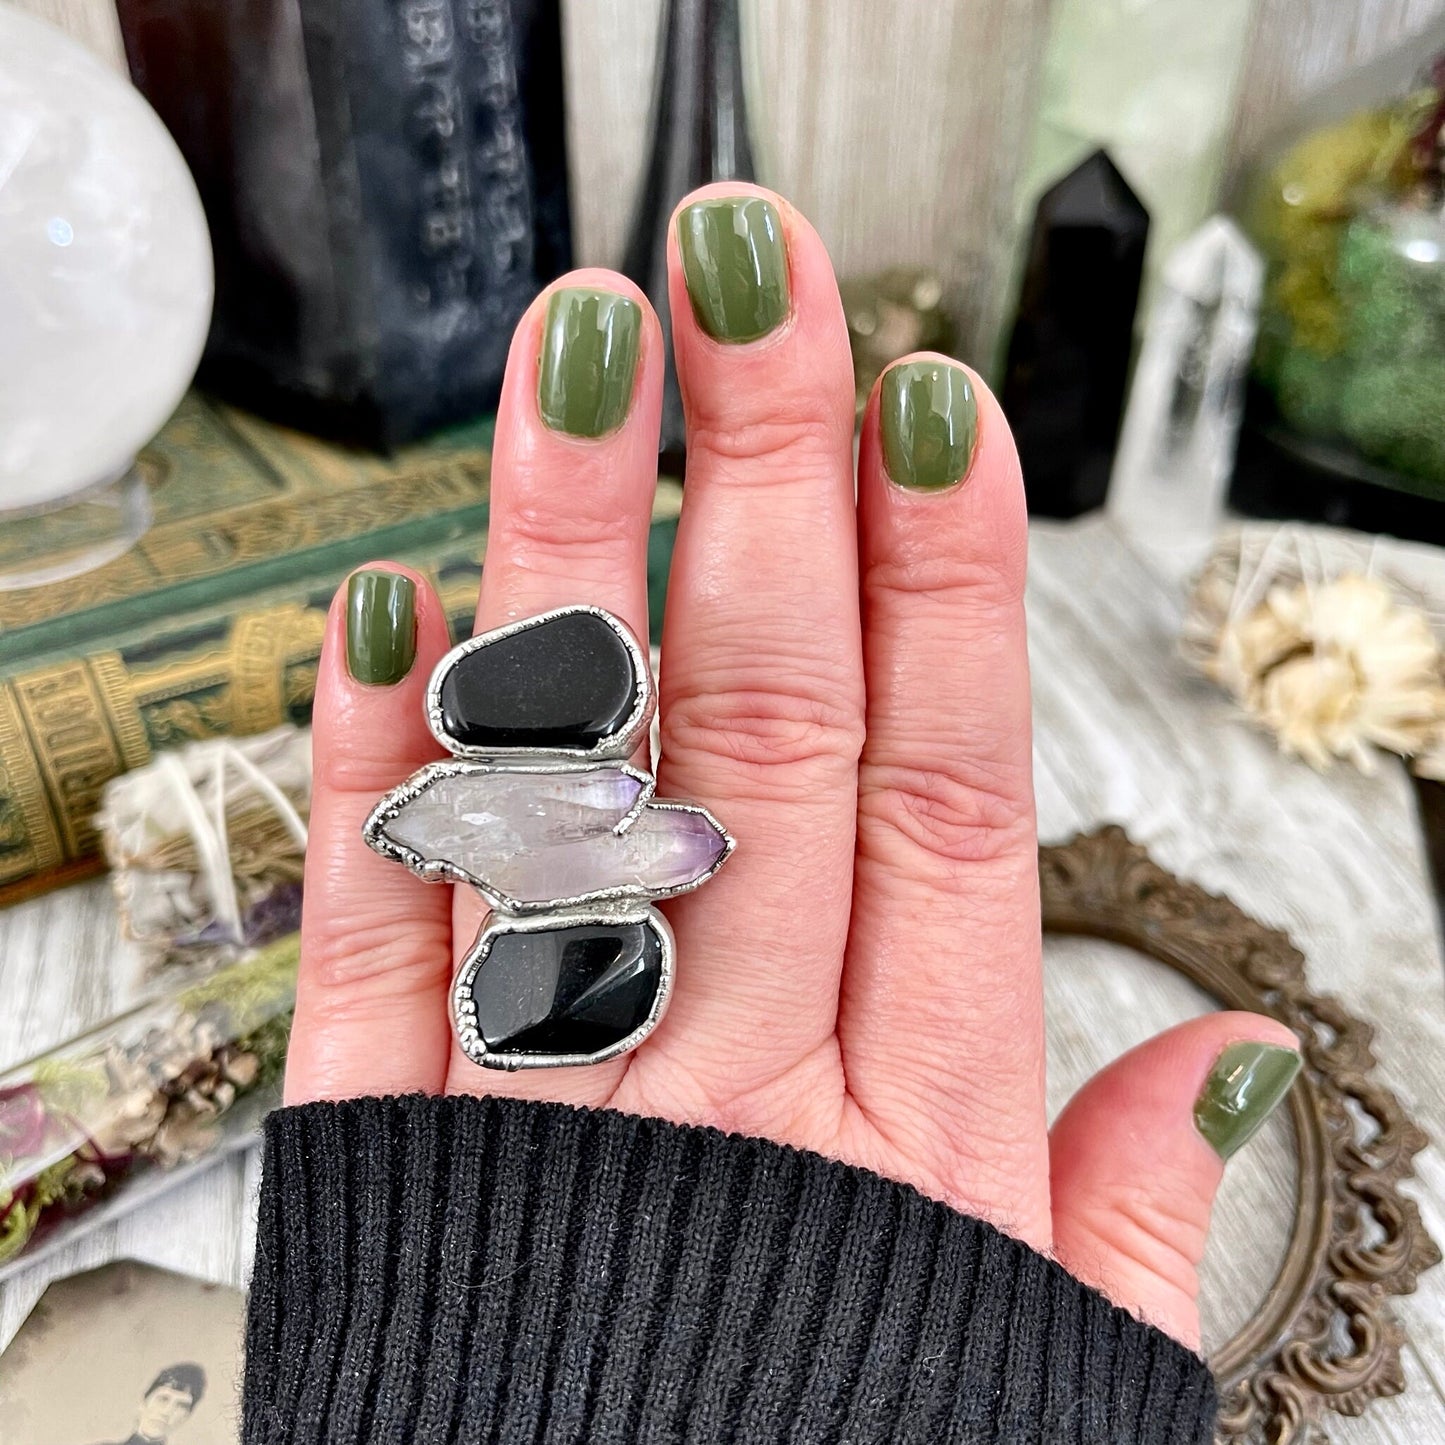 Size 7 Crystal Ring - Three Stone Black Onyx Purple Veracruz Amethyst Silver Ring / Foxlark Collection - One of a Kind / Big Crystal Jewelry